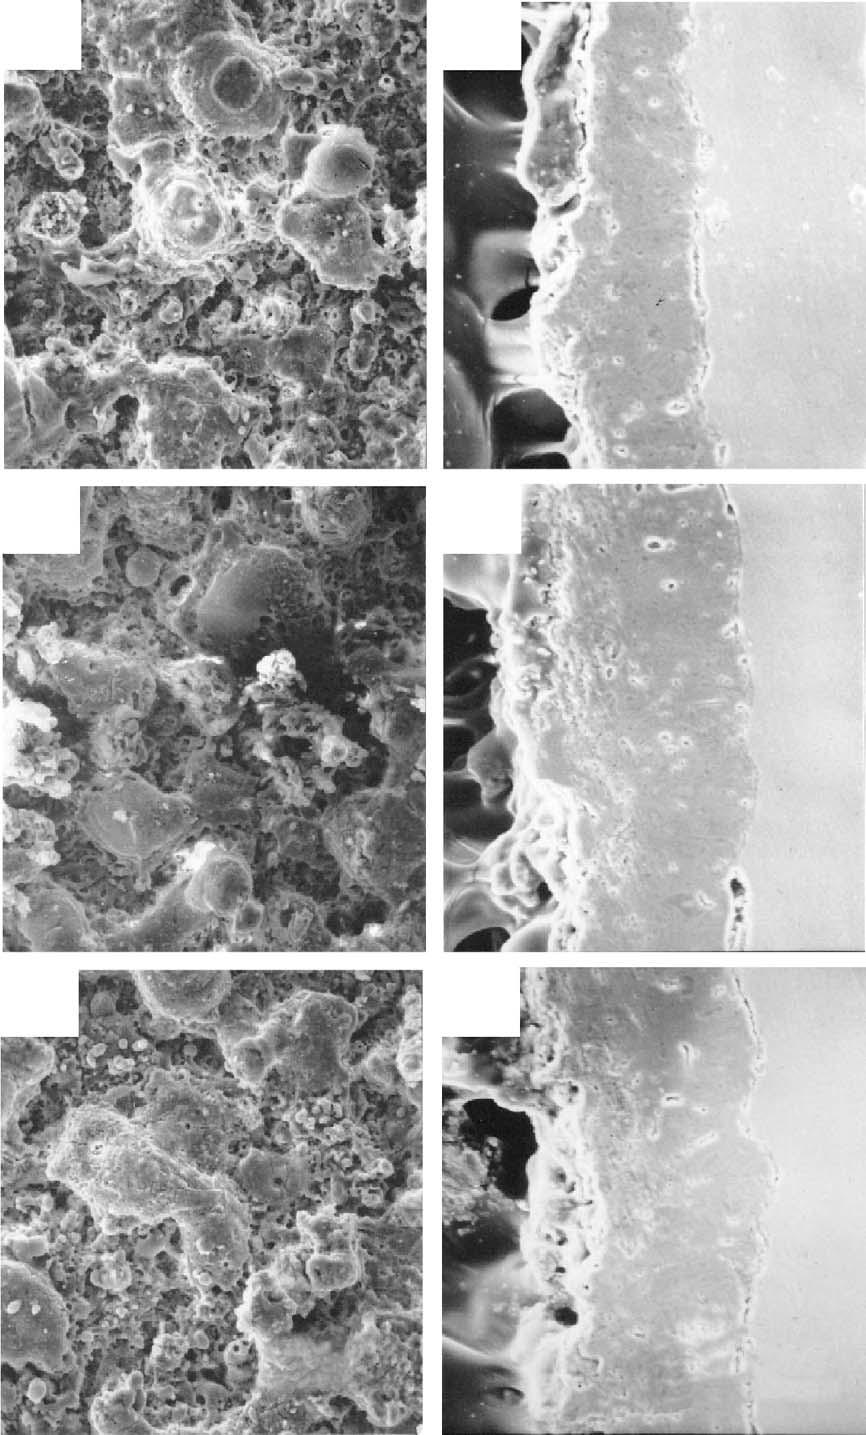 122 Z. Yao et al. / Thin Solid Films 468 (2004) 120 124 Fig. 1. SEM morphology of surface ((a), (b), (c)) and section ((d), (e), (f)) of the coatings of different current densities.